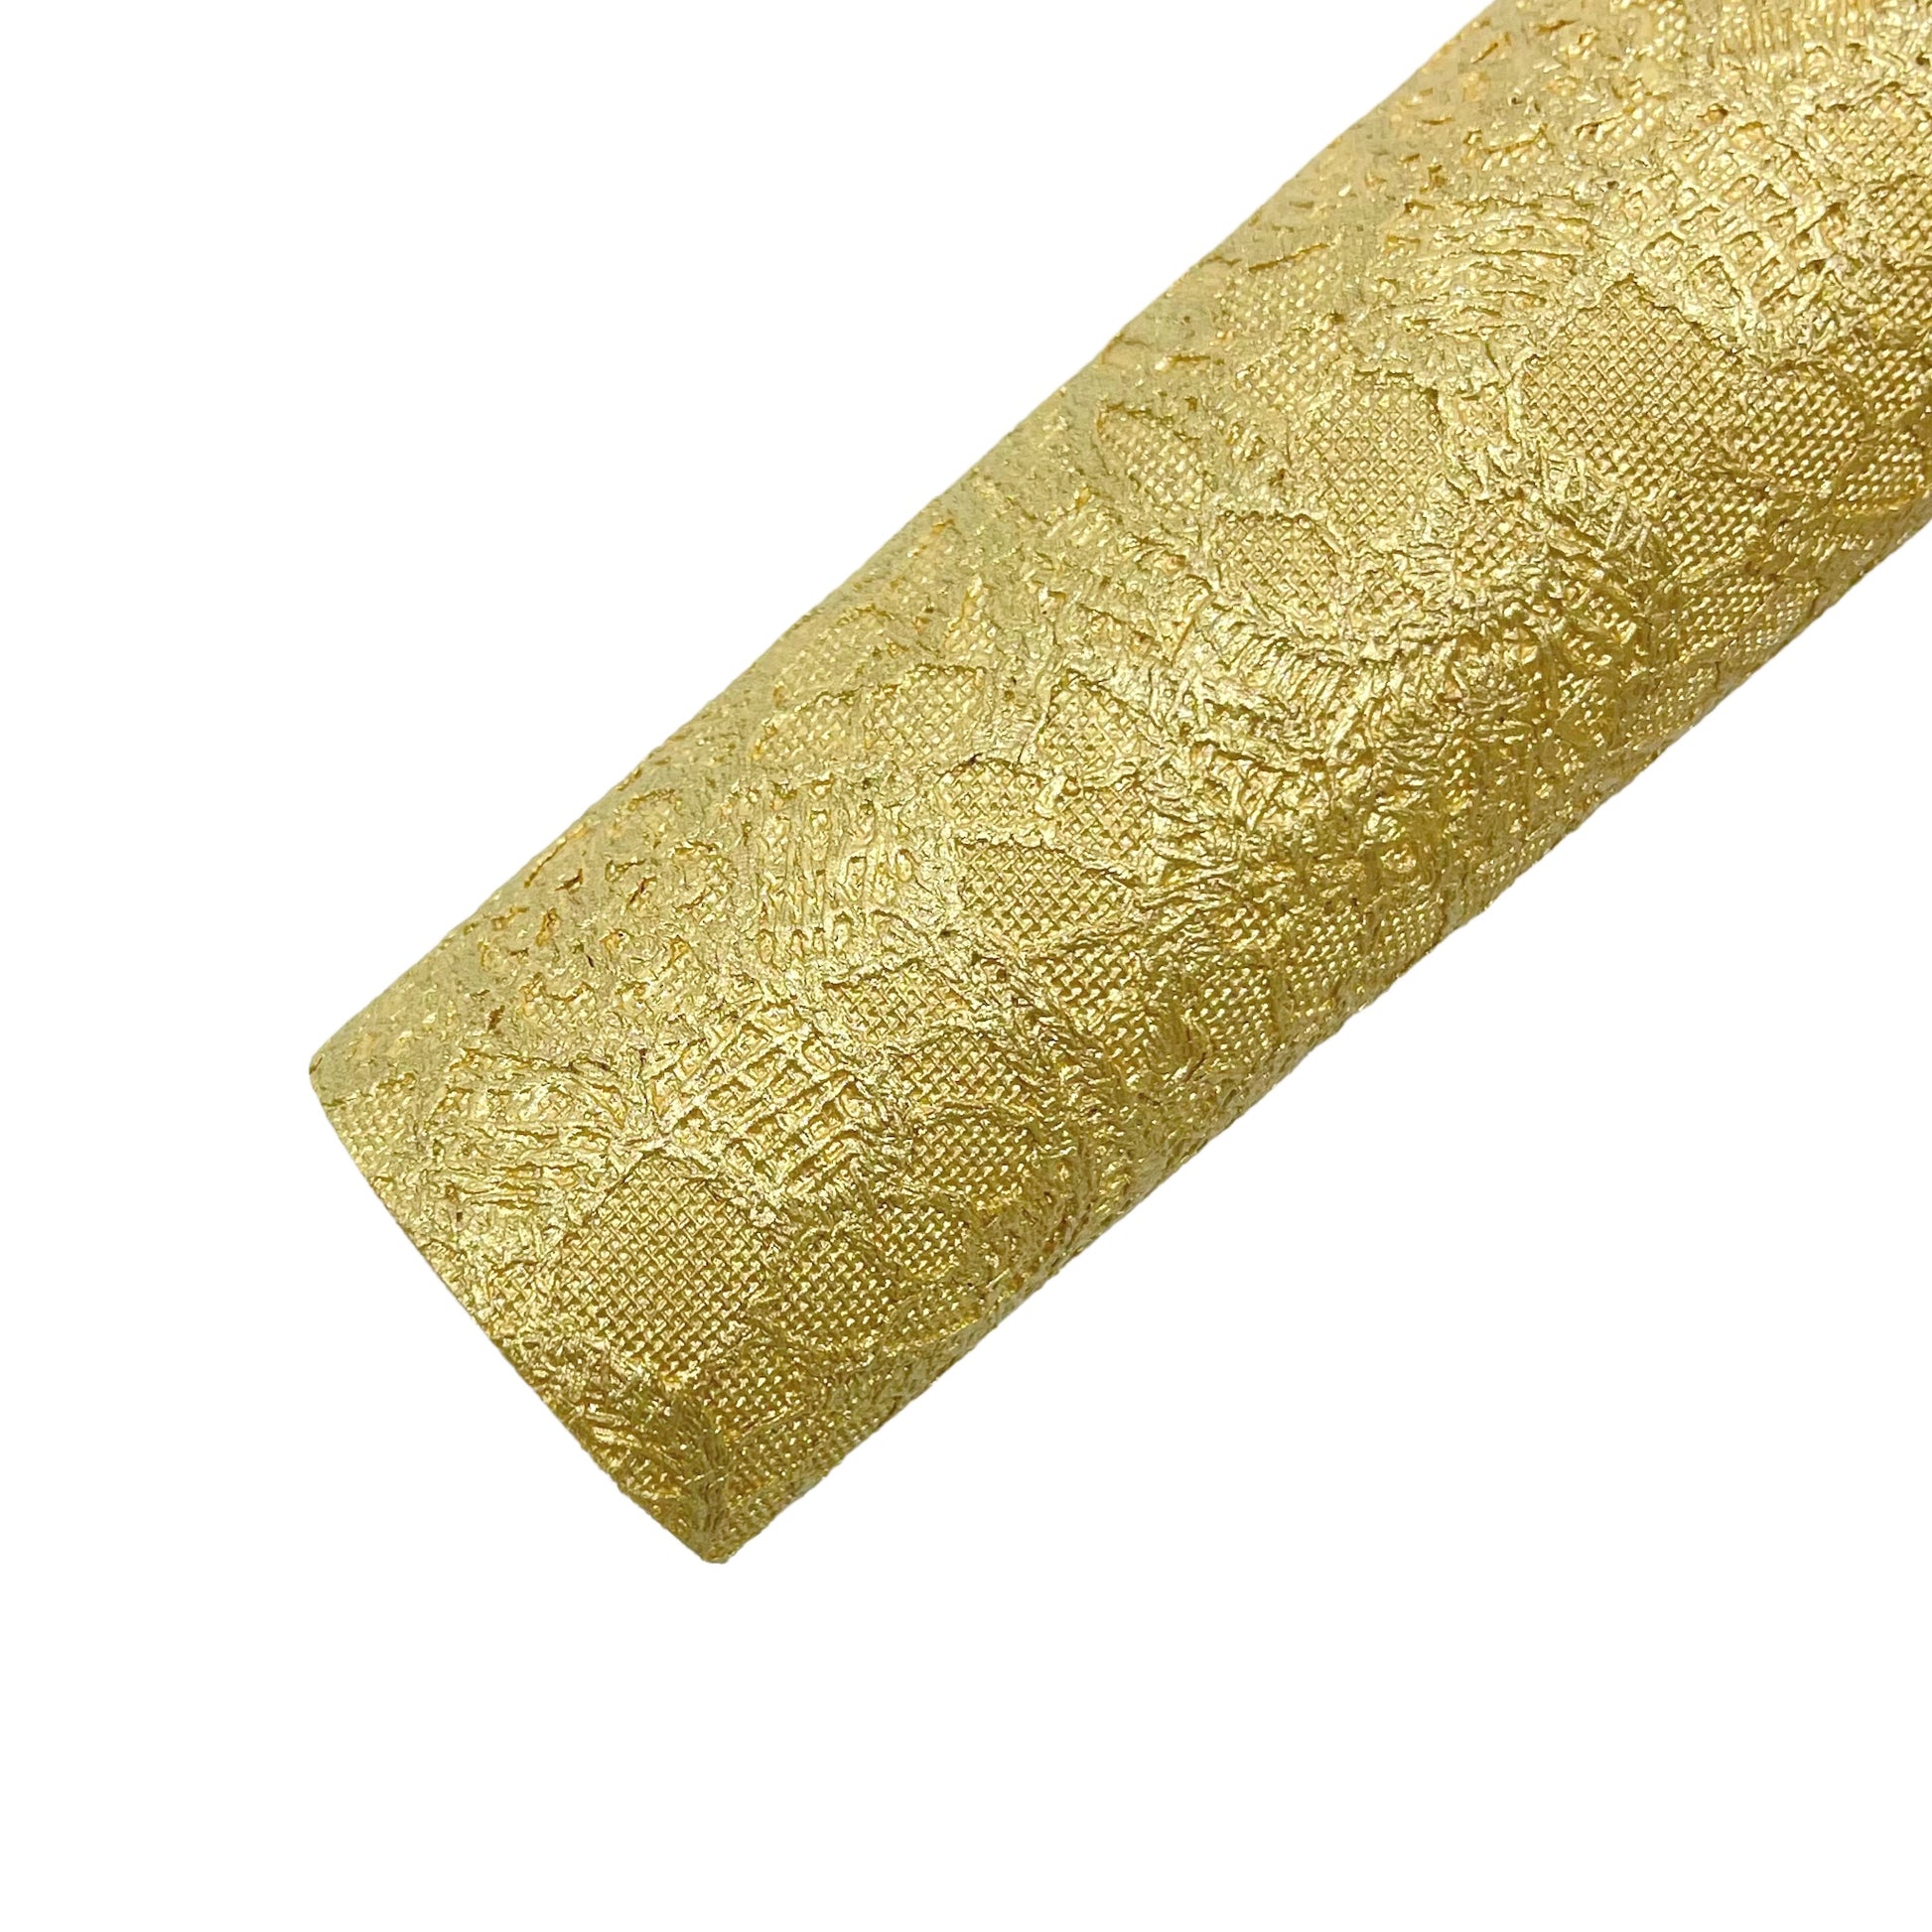 Lace Embossed Faux Leather Fabric Rolls, Faux Leather Sheet Embossed